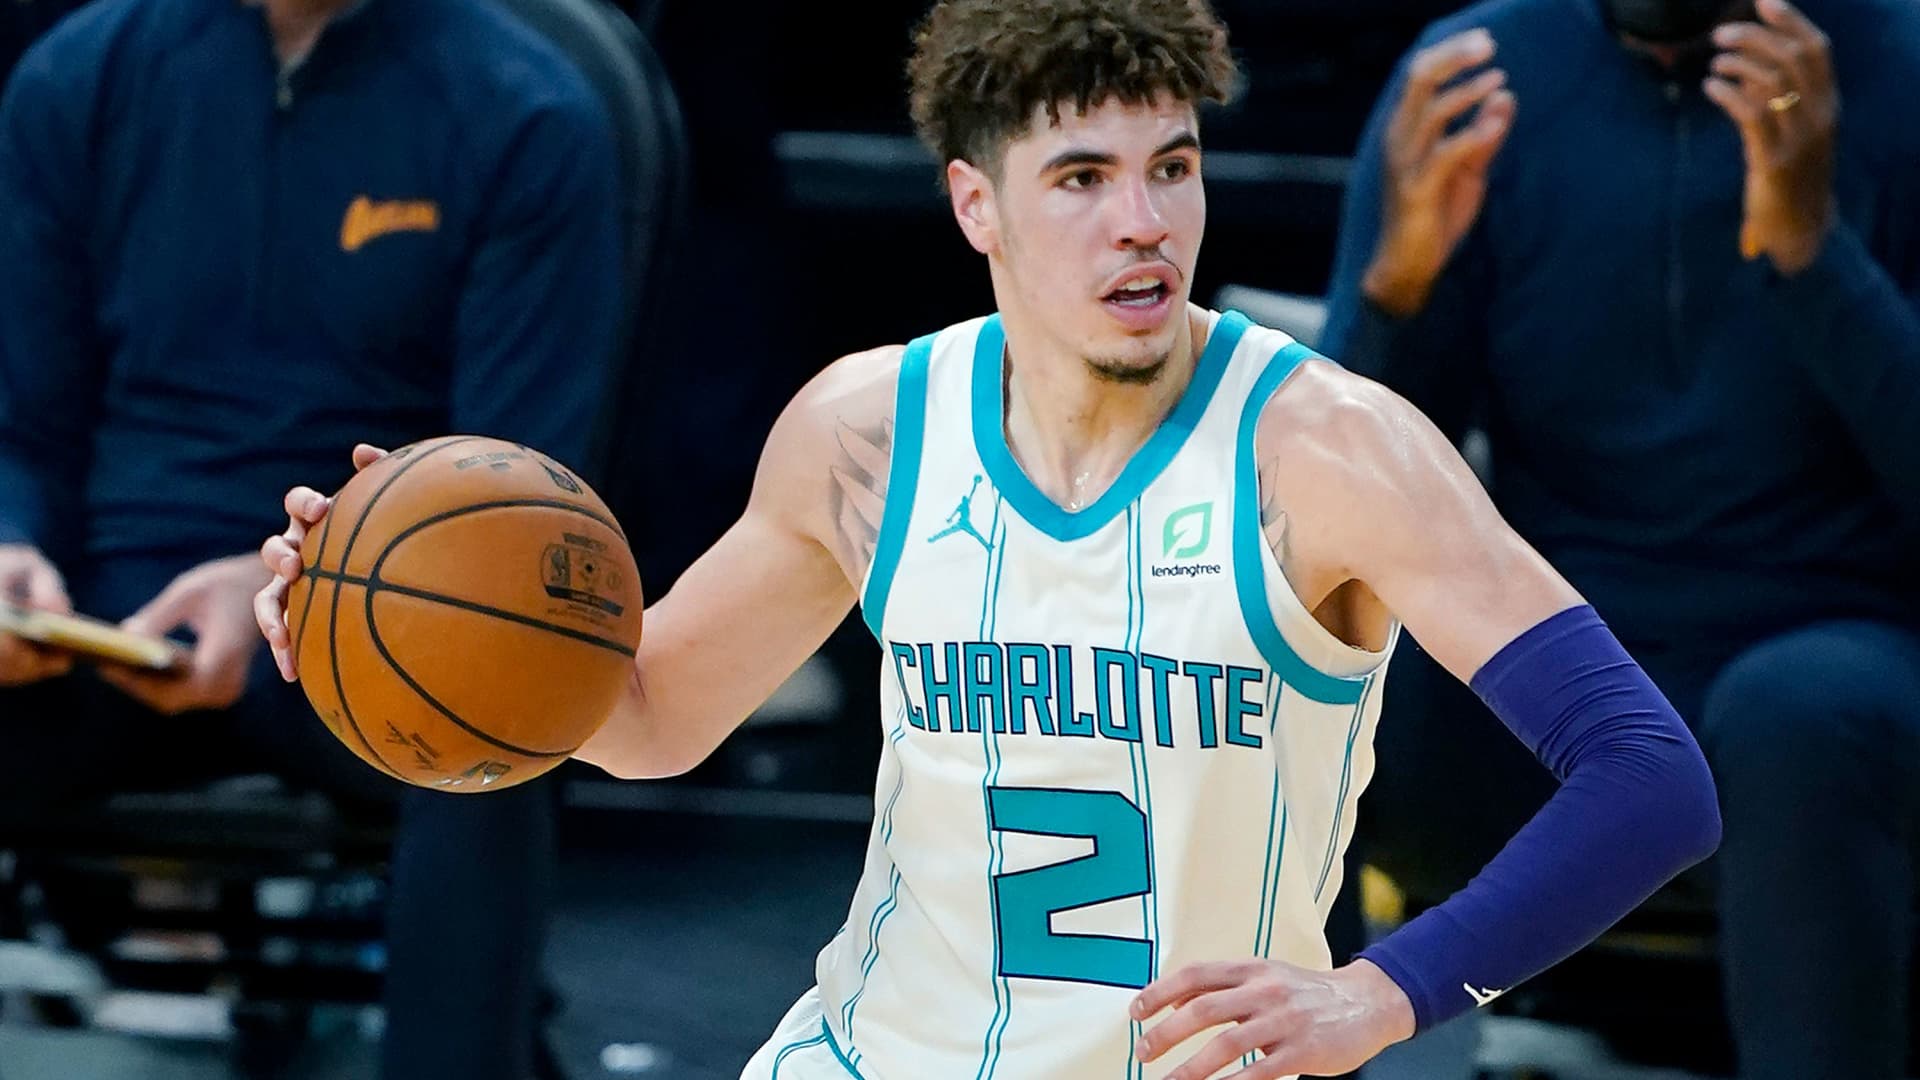 LaMelo Ball #2 of the Charlotte Hornets dribbles the ball up court against the Golden State Warriors during the first half of an NBA basketball game at Chase Center on February 26, 2021 in San Francisco, California.